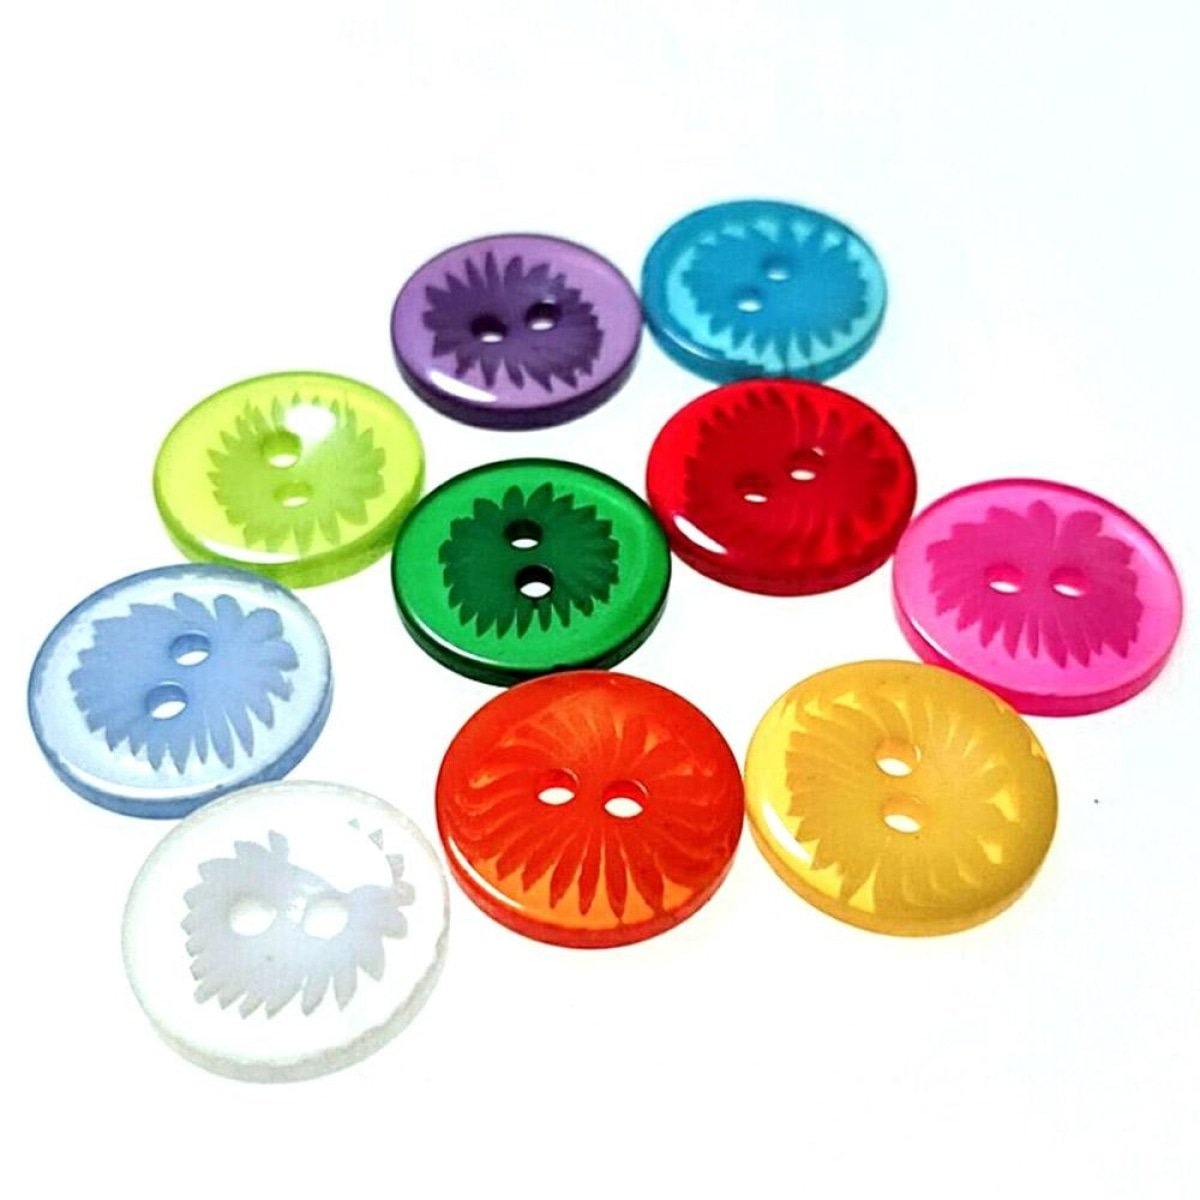 50-1000Pcs 13Mm 2 Hole Buttons Pattern Mixed Childrens Clothing Sewing